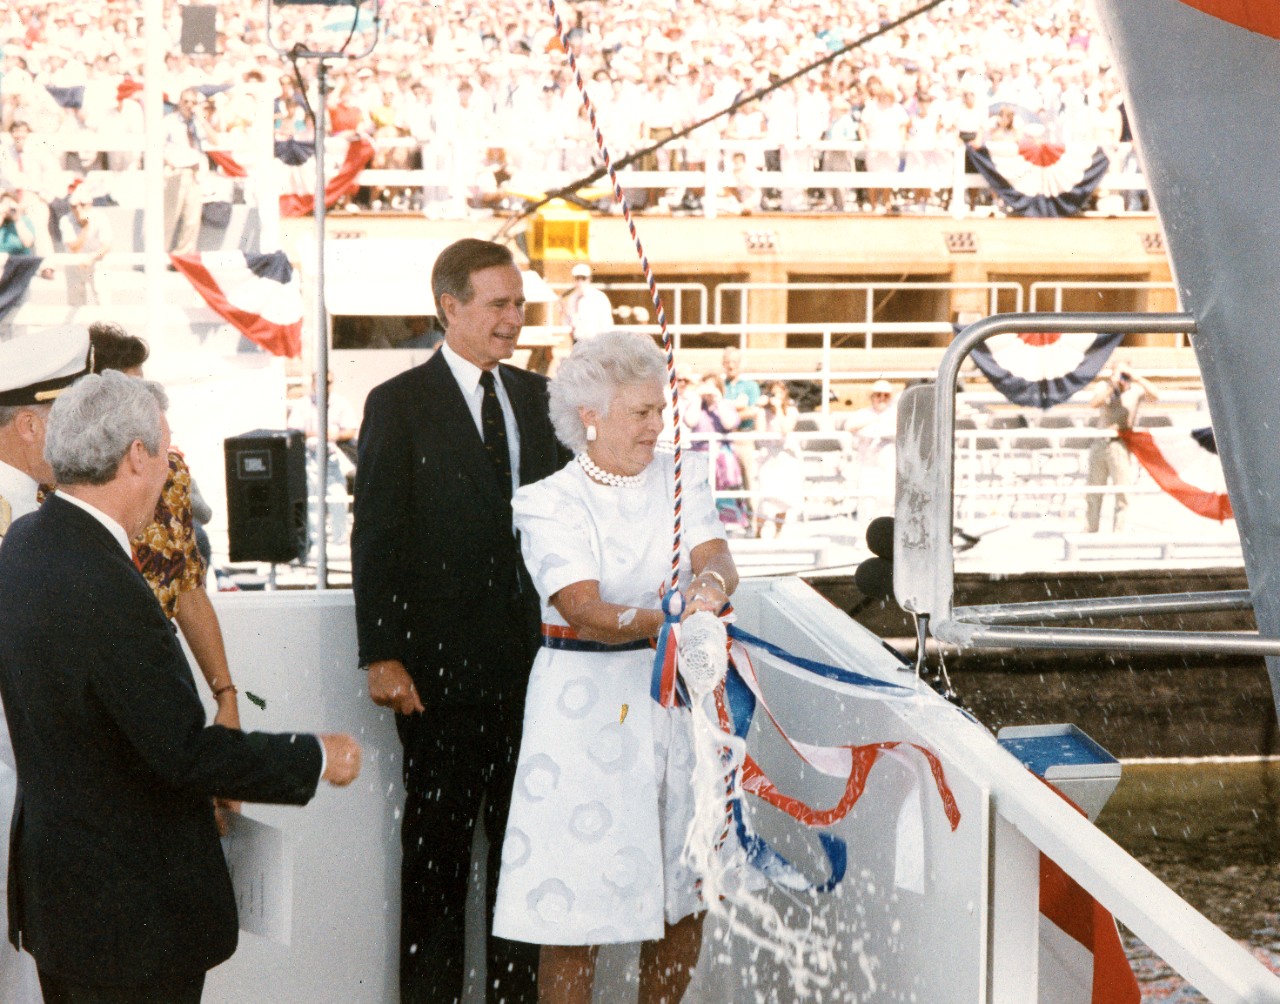 Newport News, VA - President George H.W. Bush stands by as Barbara Bush, ship's sponsor, christens the nuclear-powered aircraft carrier USS George Wasington (CVN-73). Edward J. Campbell, president of Newport News Shipbuilding, is at left. July 21, 1990. 